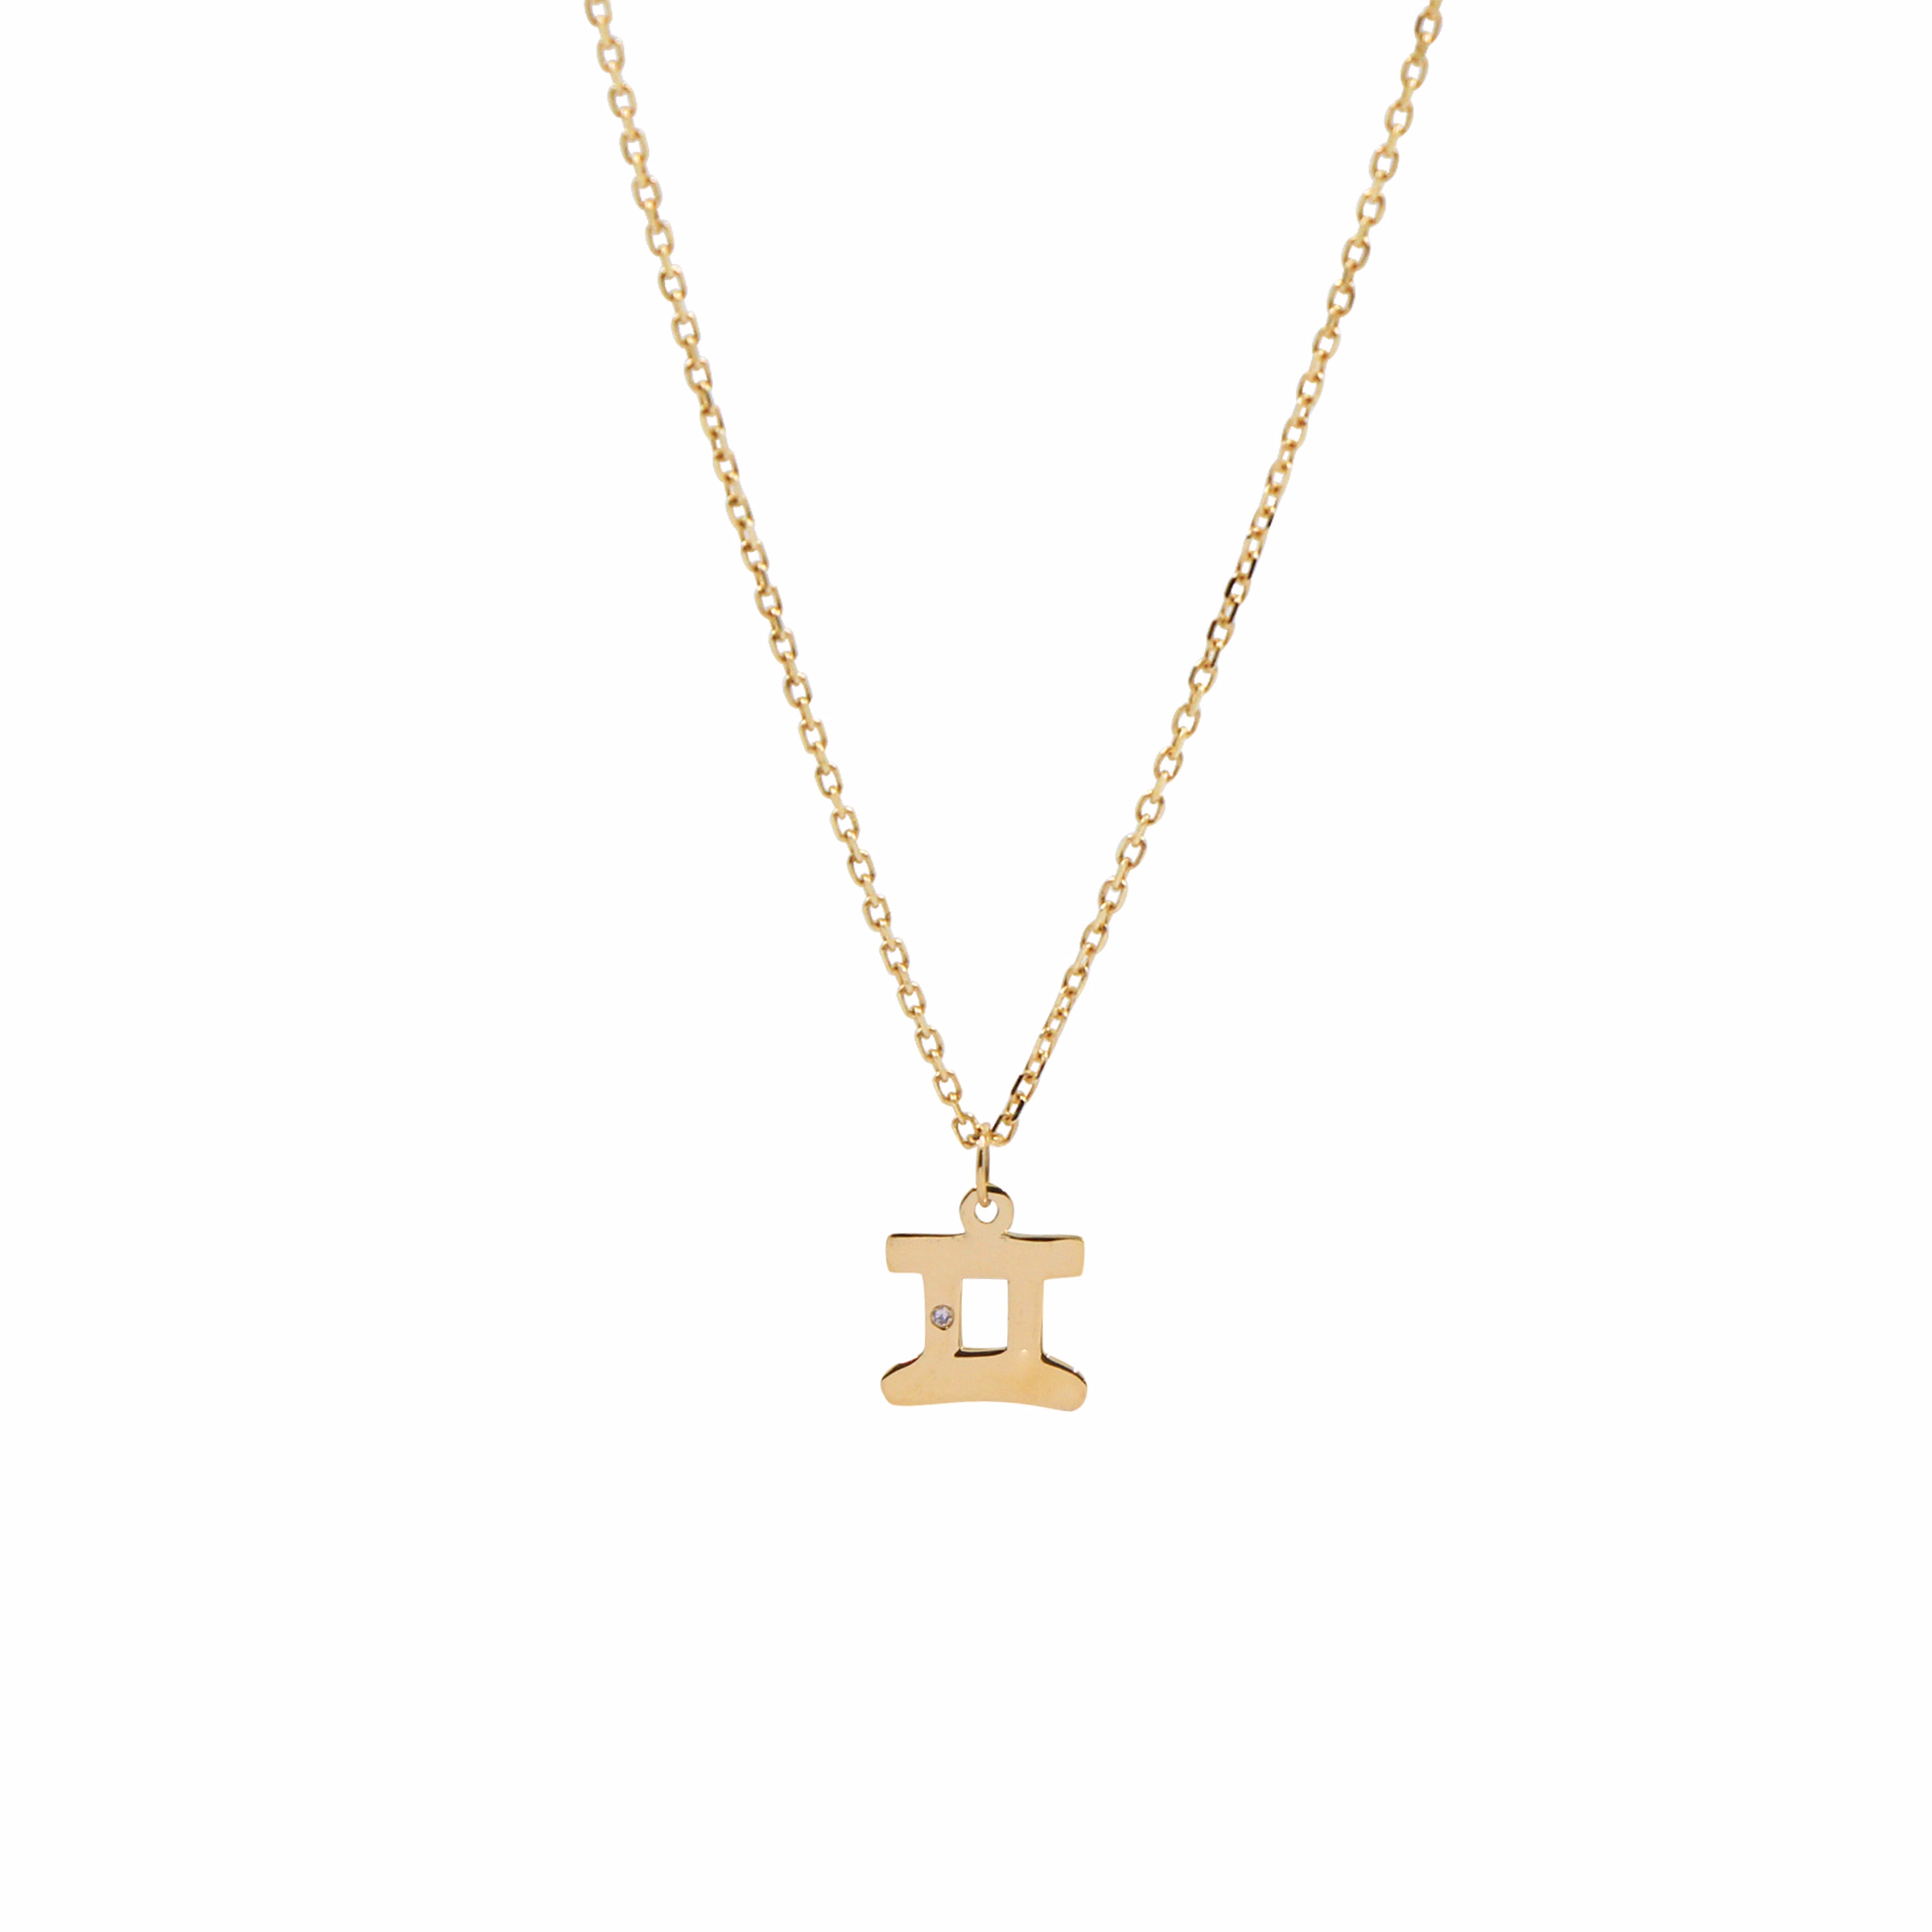 Shop Stunning Gold Zodiac Necklace for Gemini